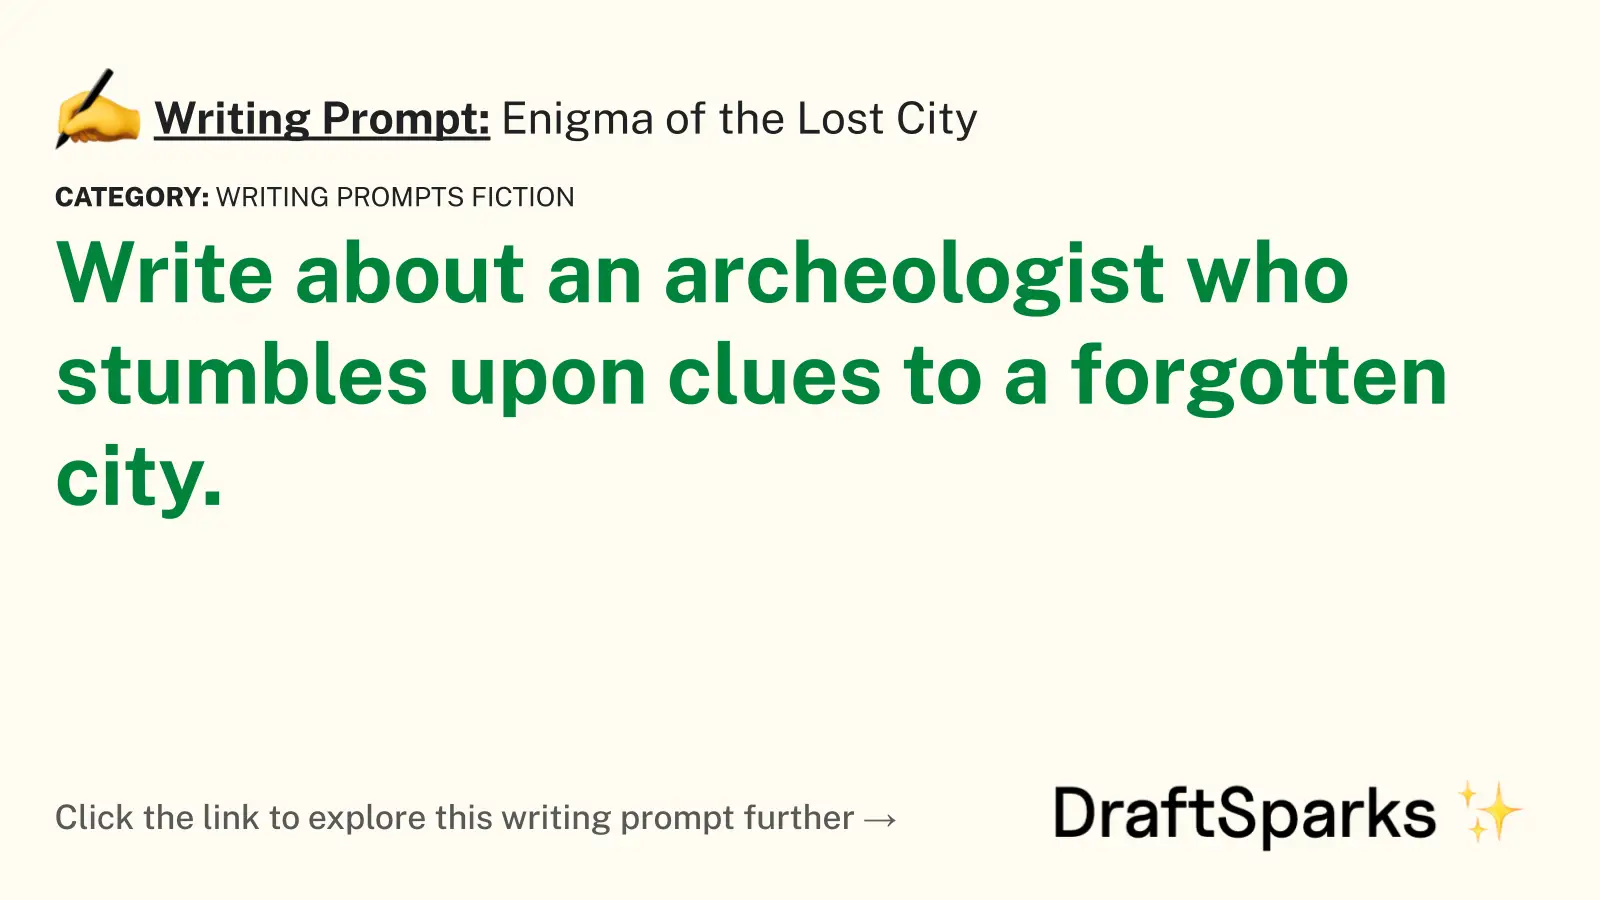 Enigma of the Lost City